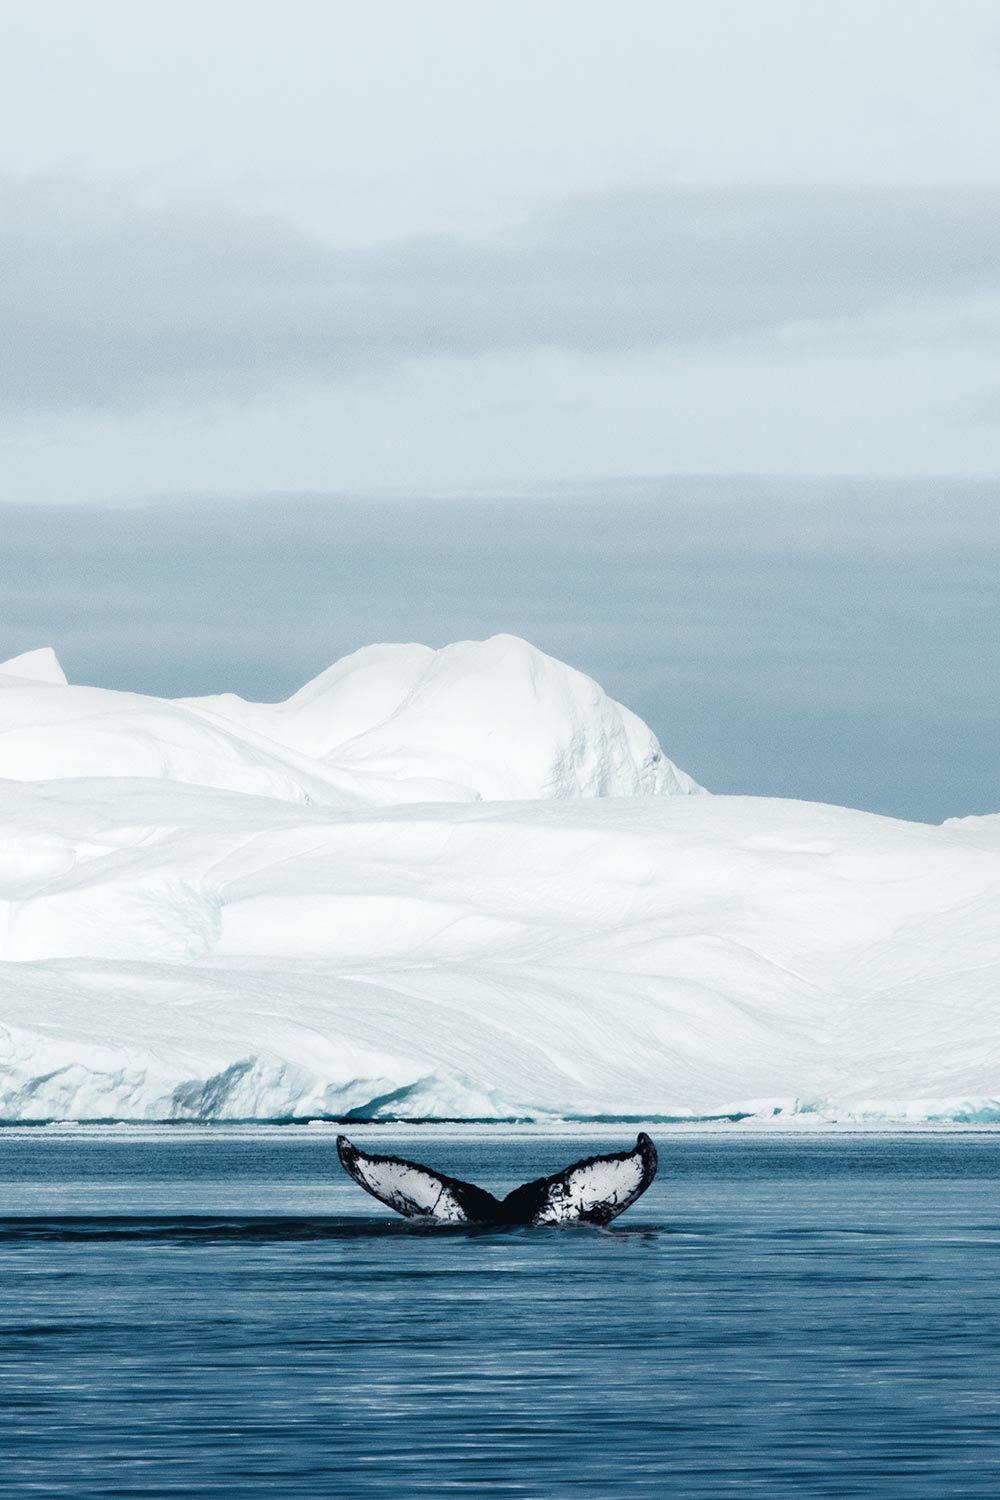 Arctic harmony – Whale amidst icebergs in Disko Bay, Ilulissat, making it the best time for Greenland whale watching